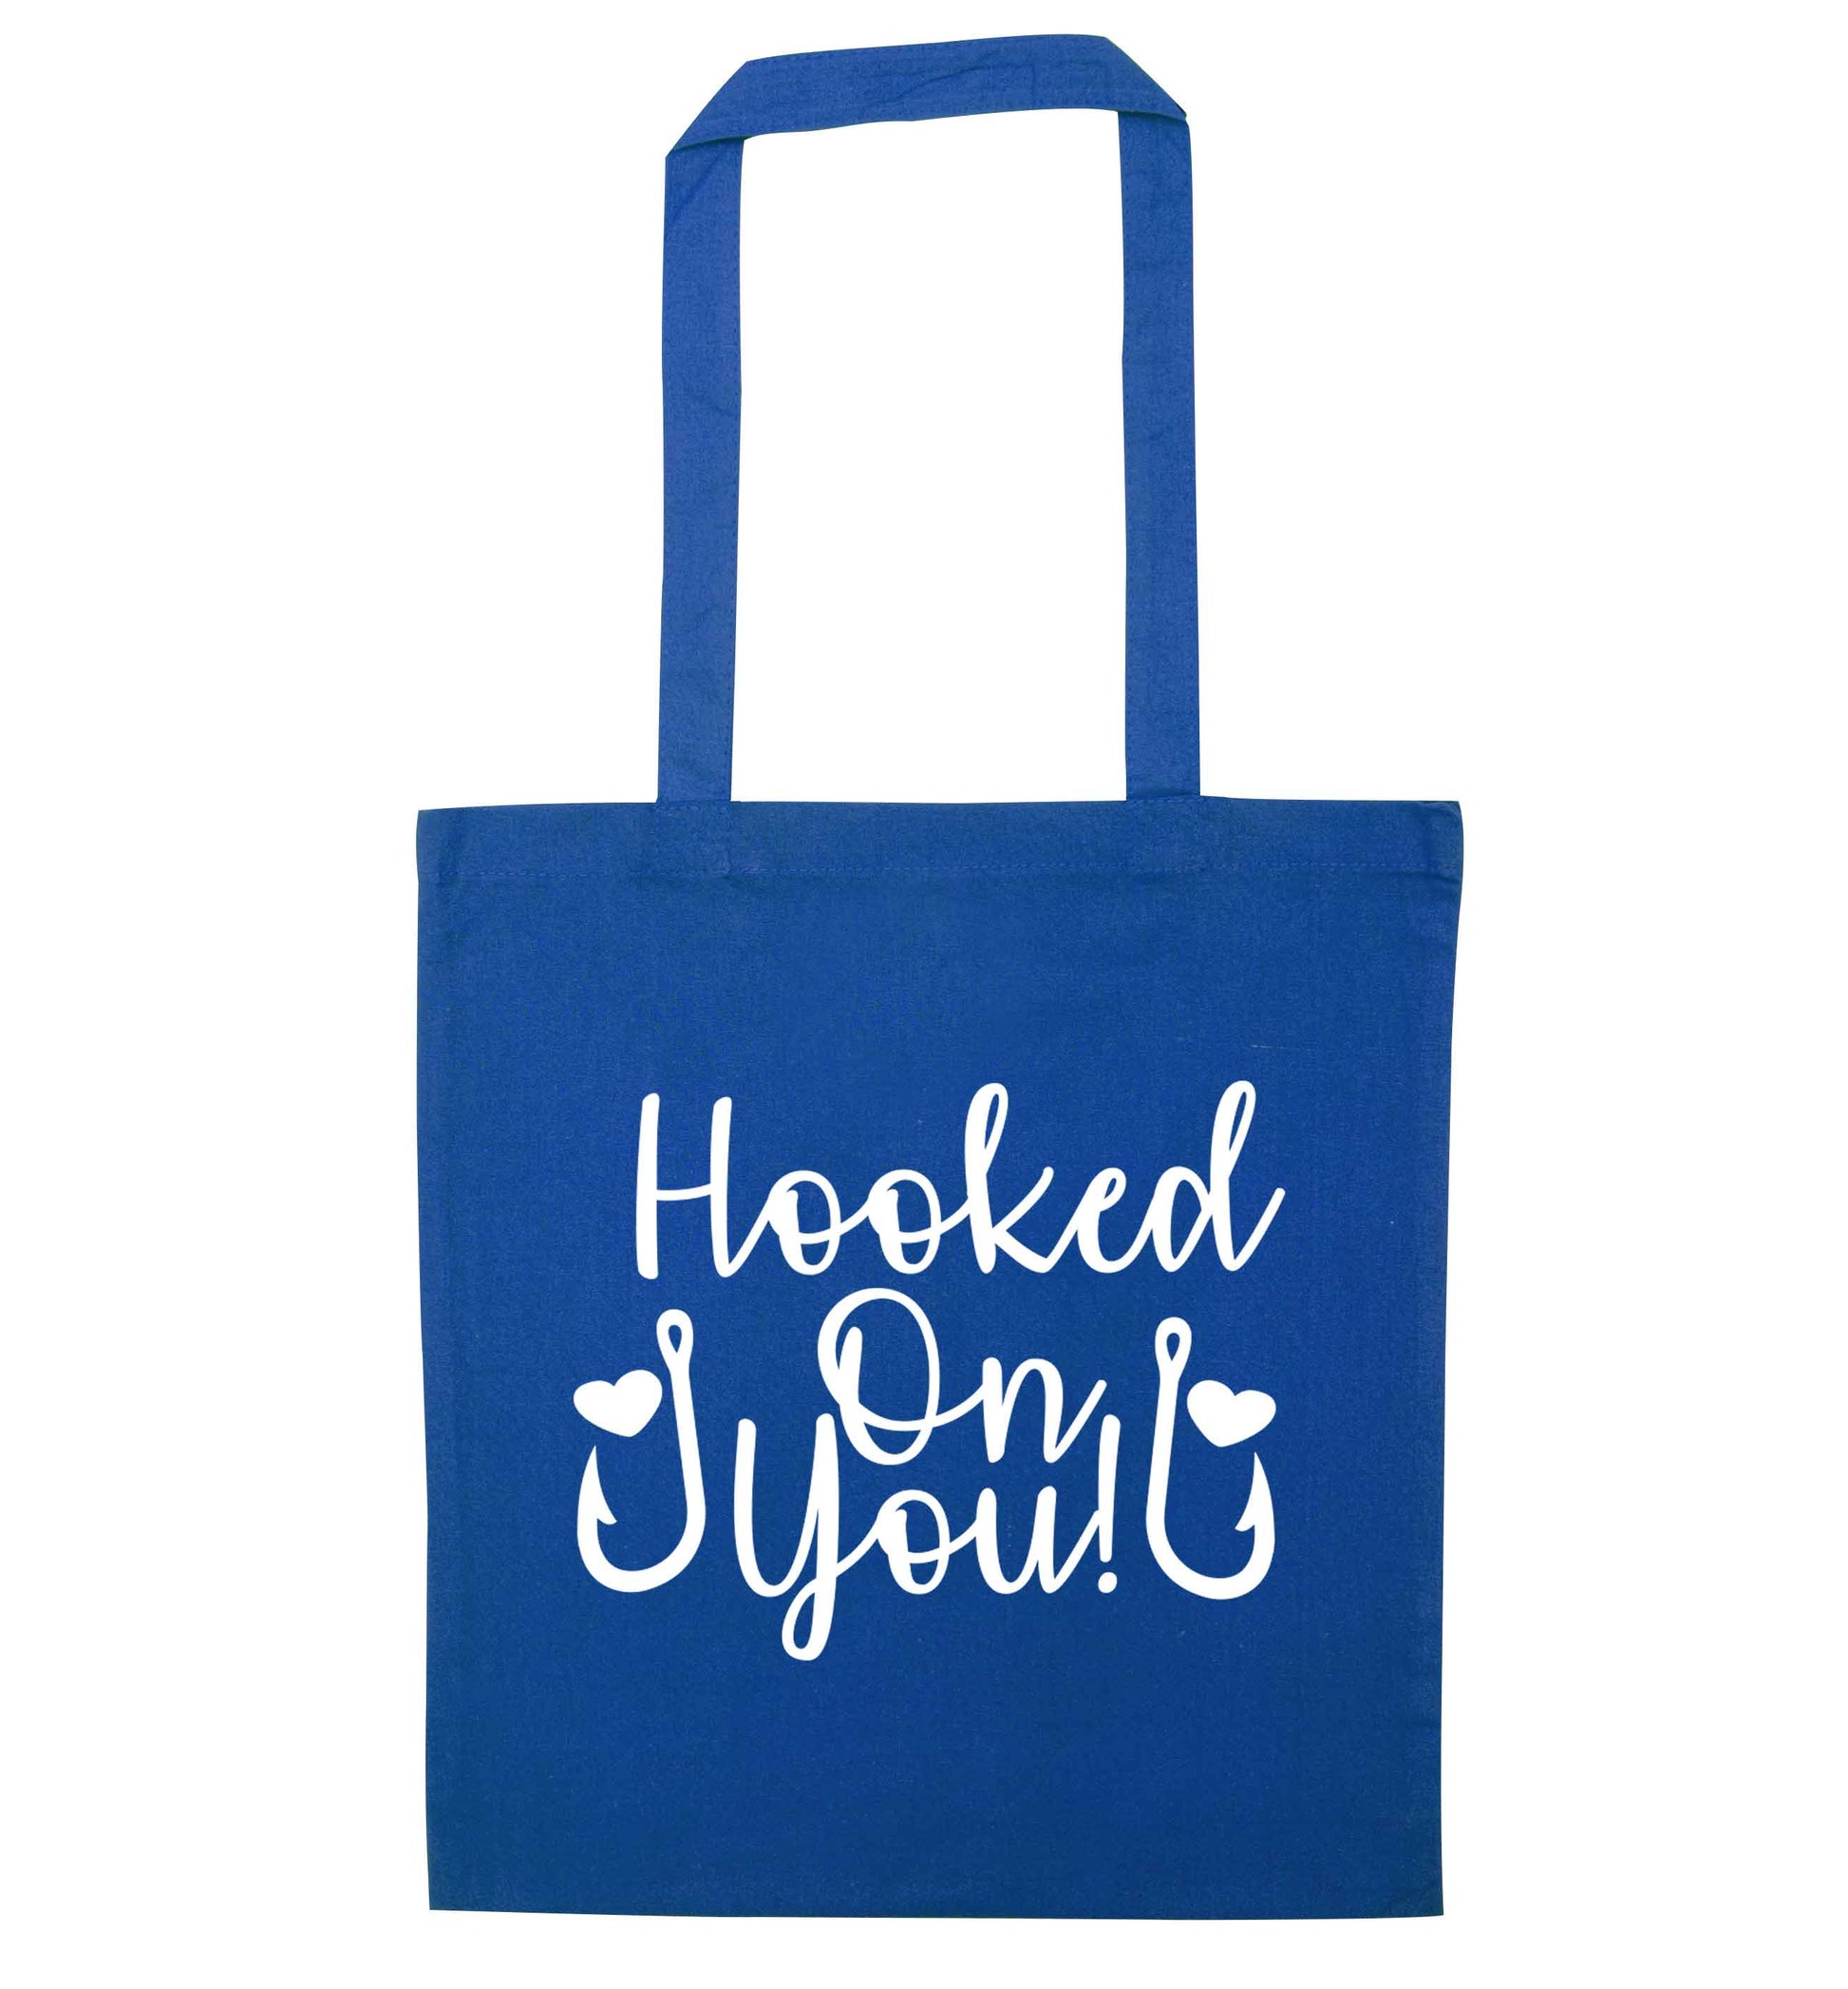 Hooked on you blue tote bag